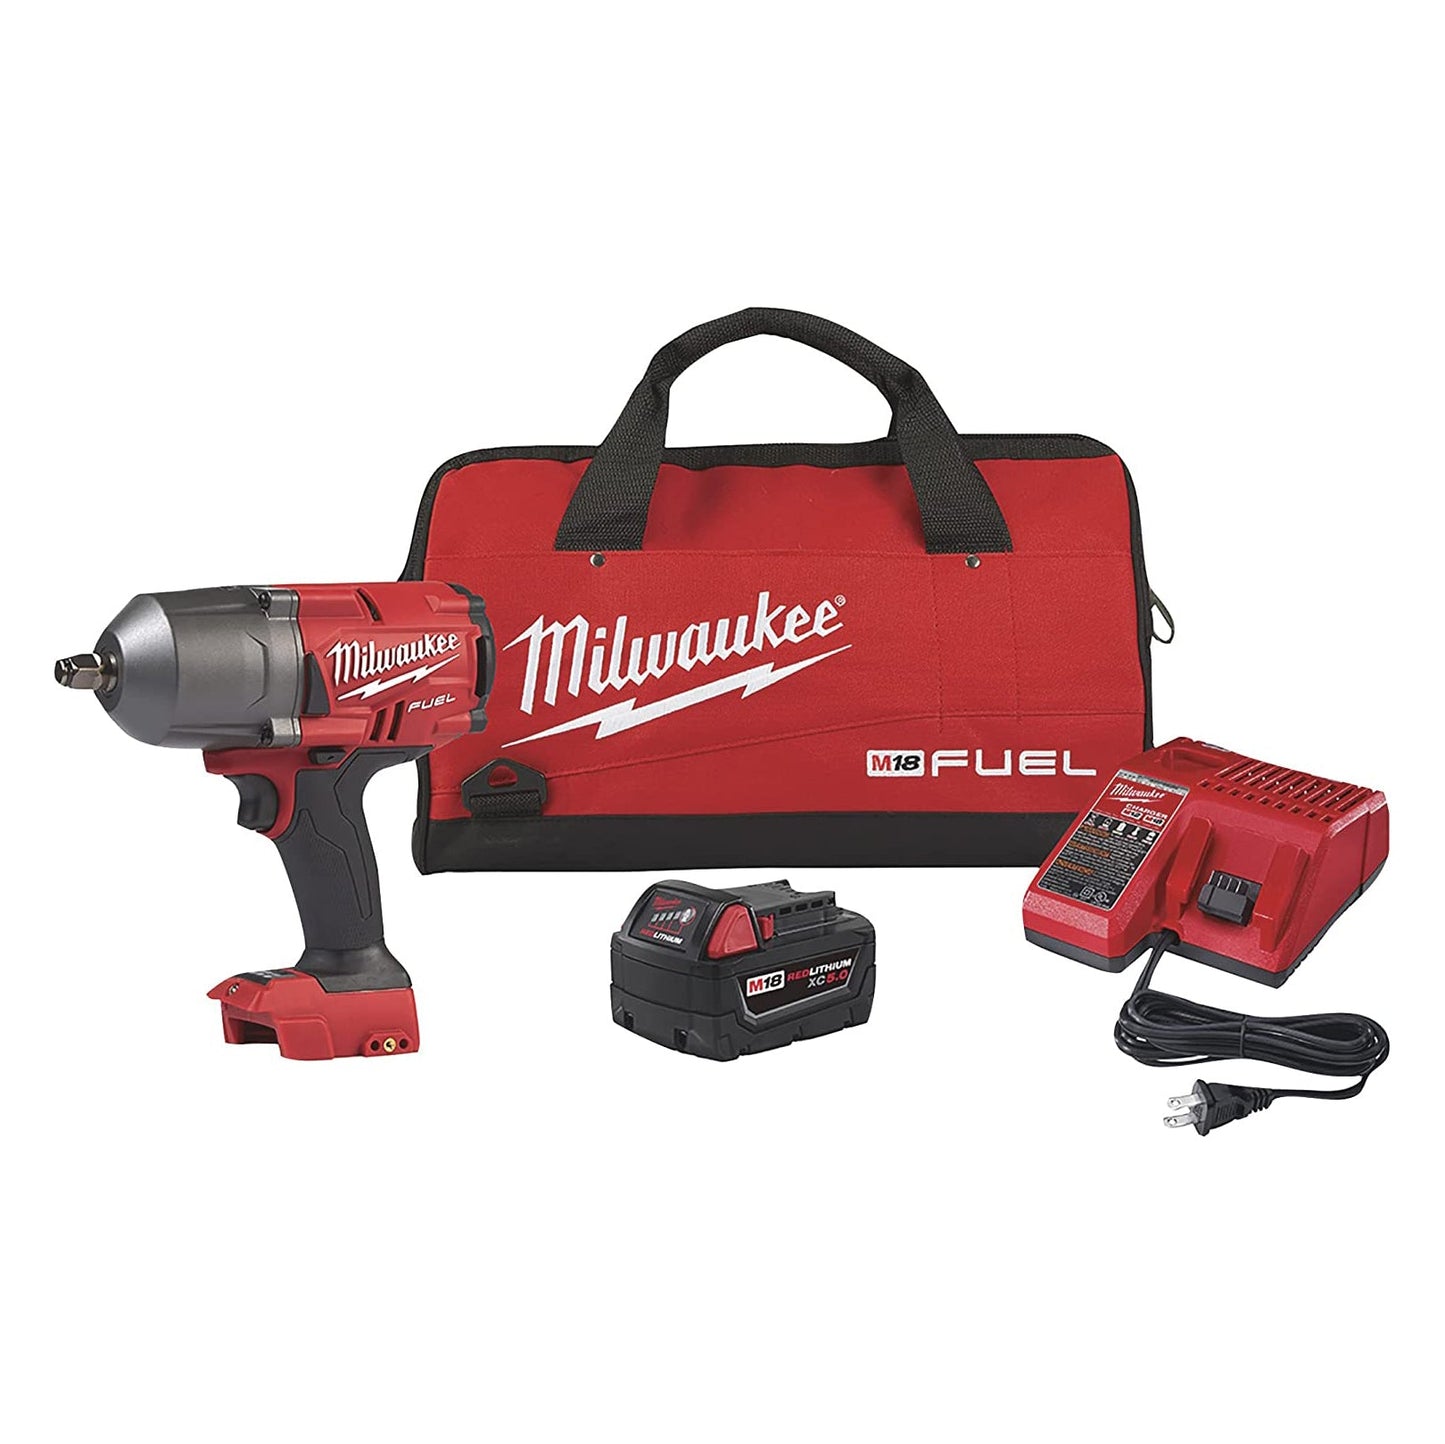 Milwaukee 2767-21B M18 FUEL 18-Volt Lithium-Ion Brushless Cordless 1/2 in. Impact Wrench w/Friction Ring (2767-20) w/One XC5.0 Ah Battery, M18/M12 Multi-Voltage Charger and Contractor Bag - Nyson Retail